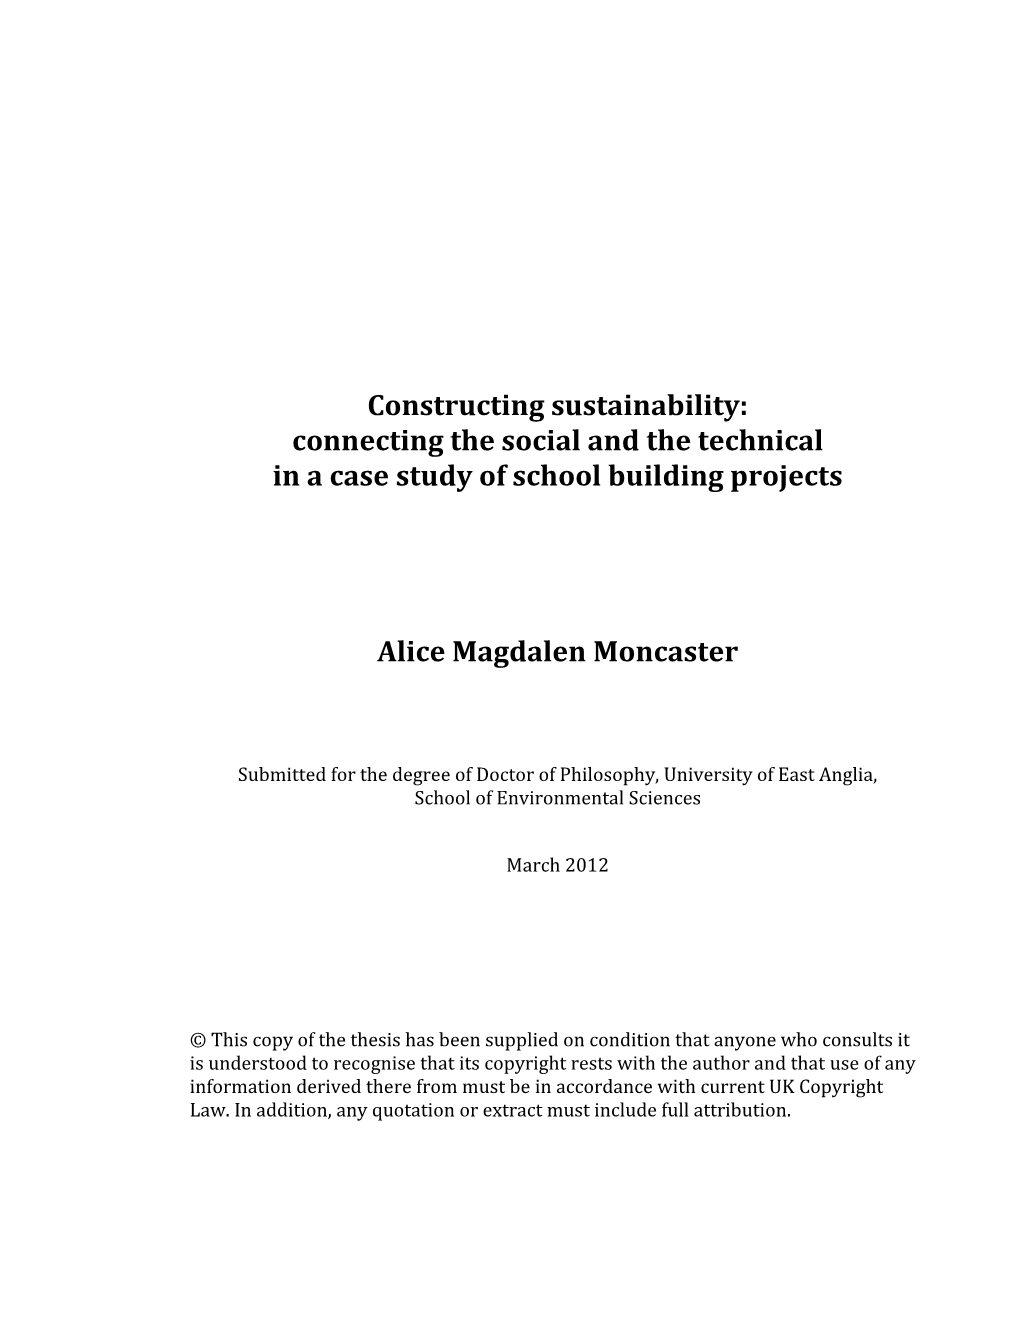 Connecting the Social and the Technical in a Case Study of School Building Projects